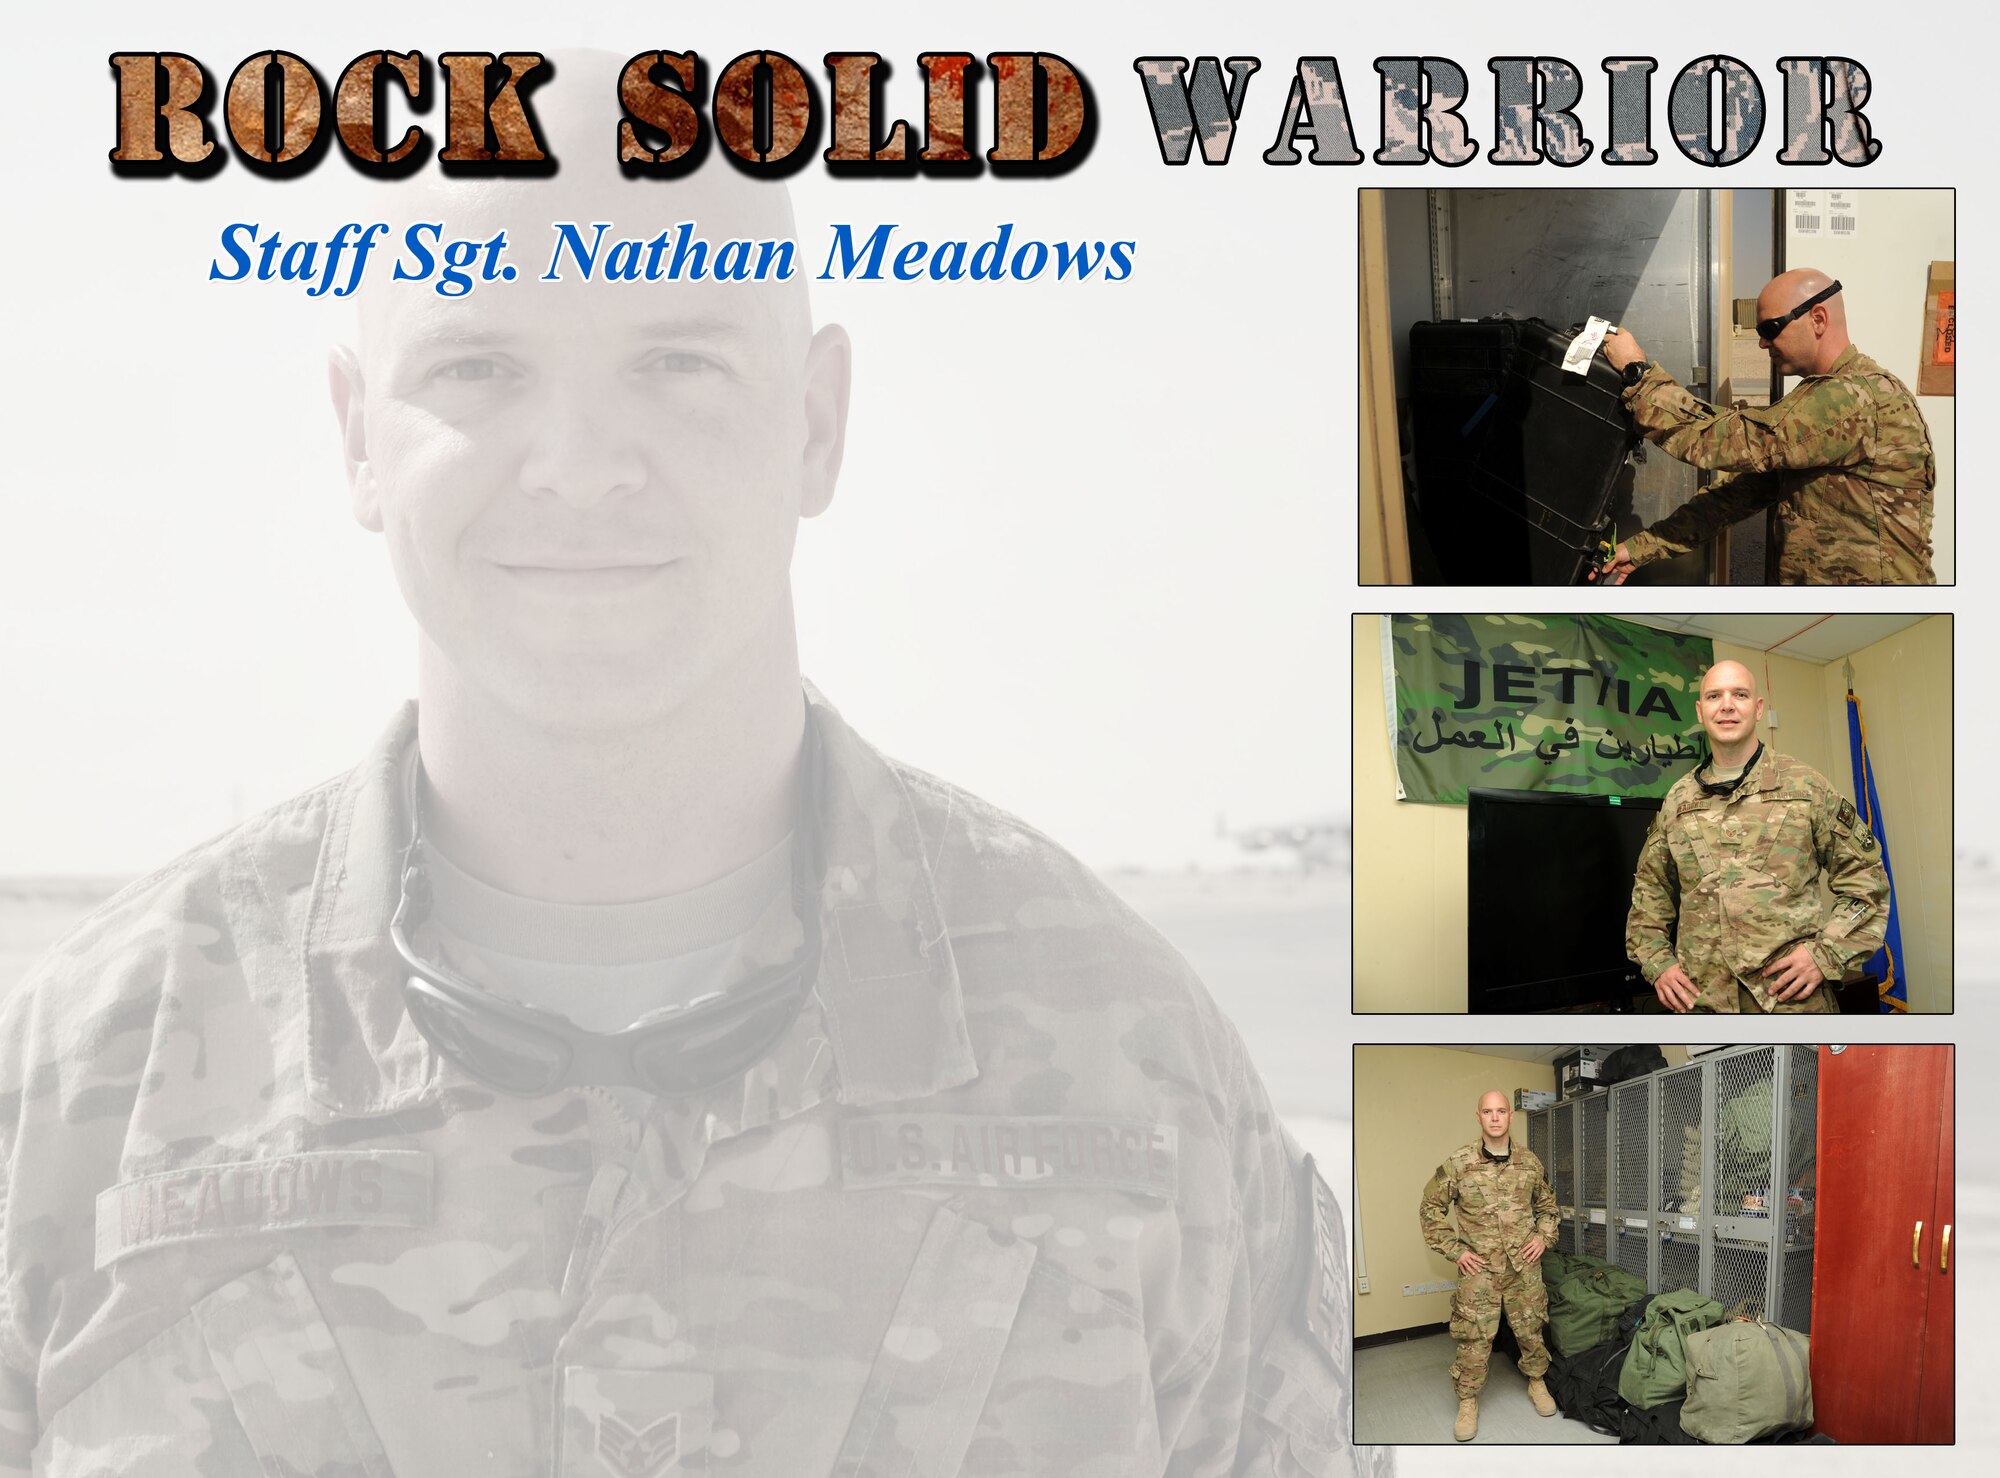 This week’s Rock Solid Warrior is Staff Sgt. Nathan Meadows, a 387th Air Expeditionary Squadron unit travel representative. Meadows is deployed from the Air Force Life Cycle Management Center at Maxwell Air Force Base, Gunter Annex, Alabama.